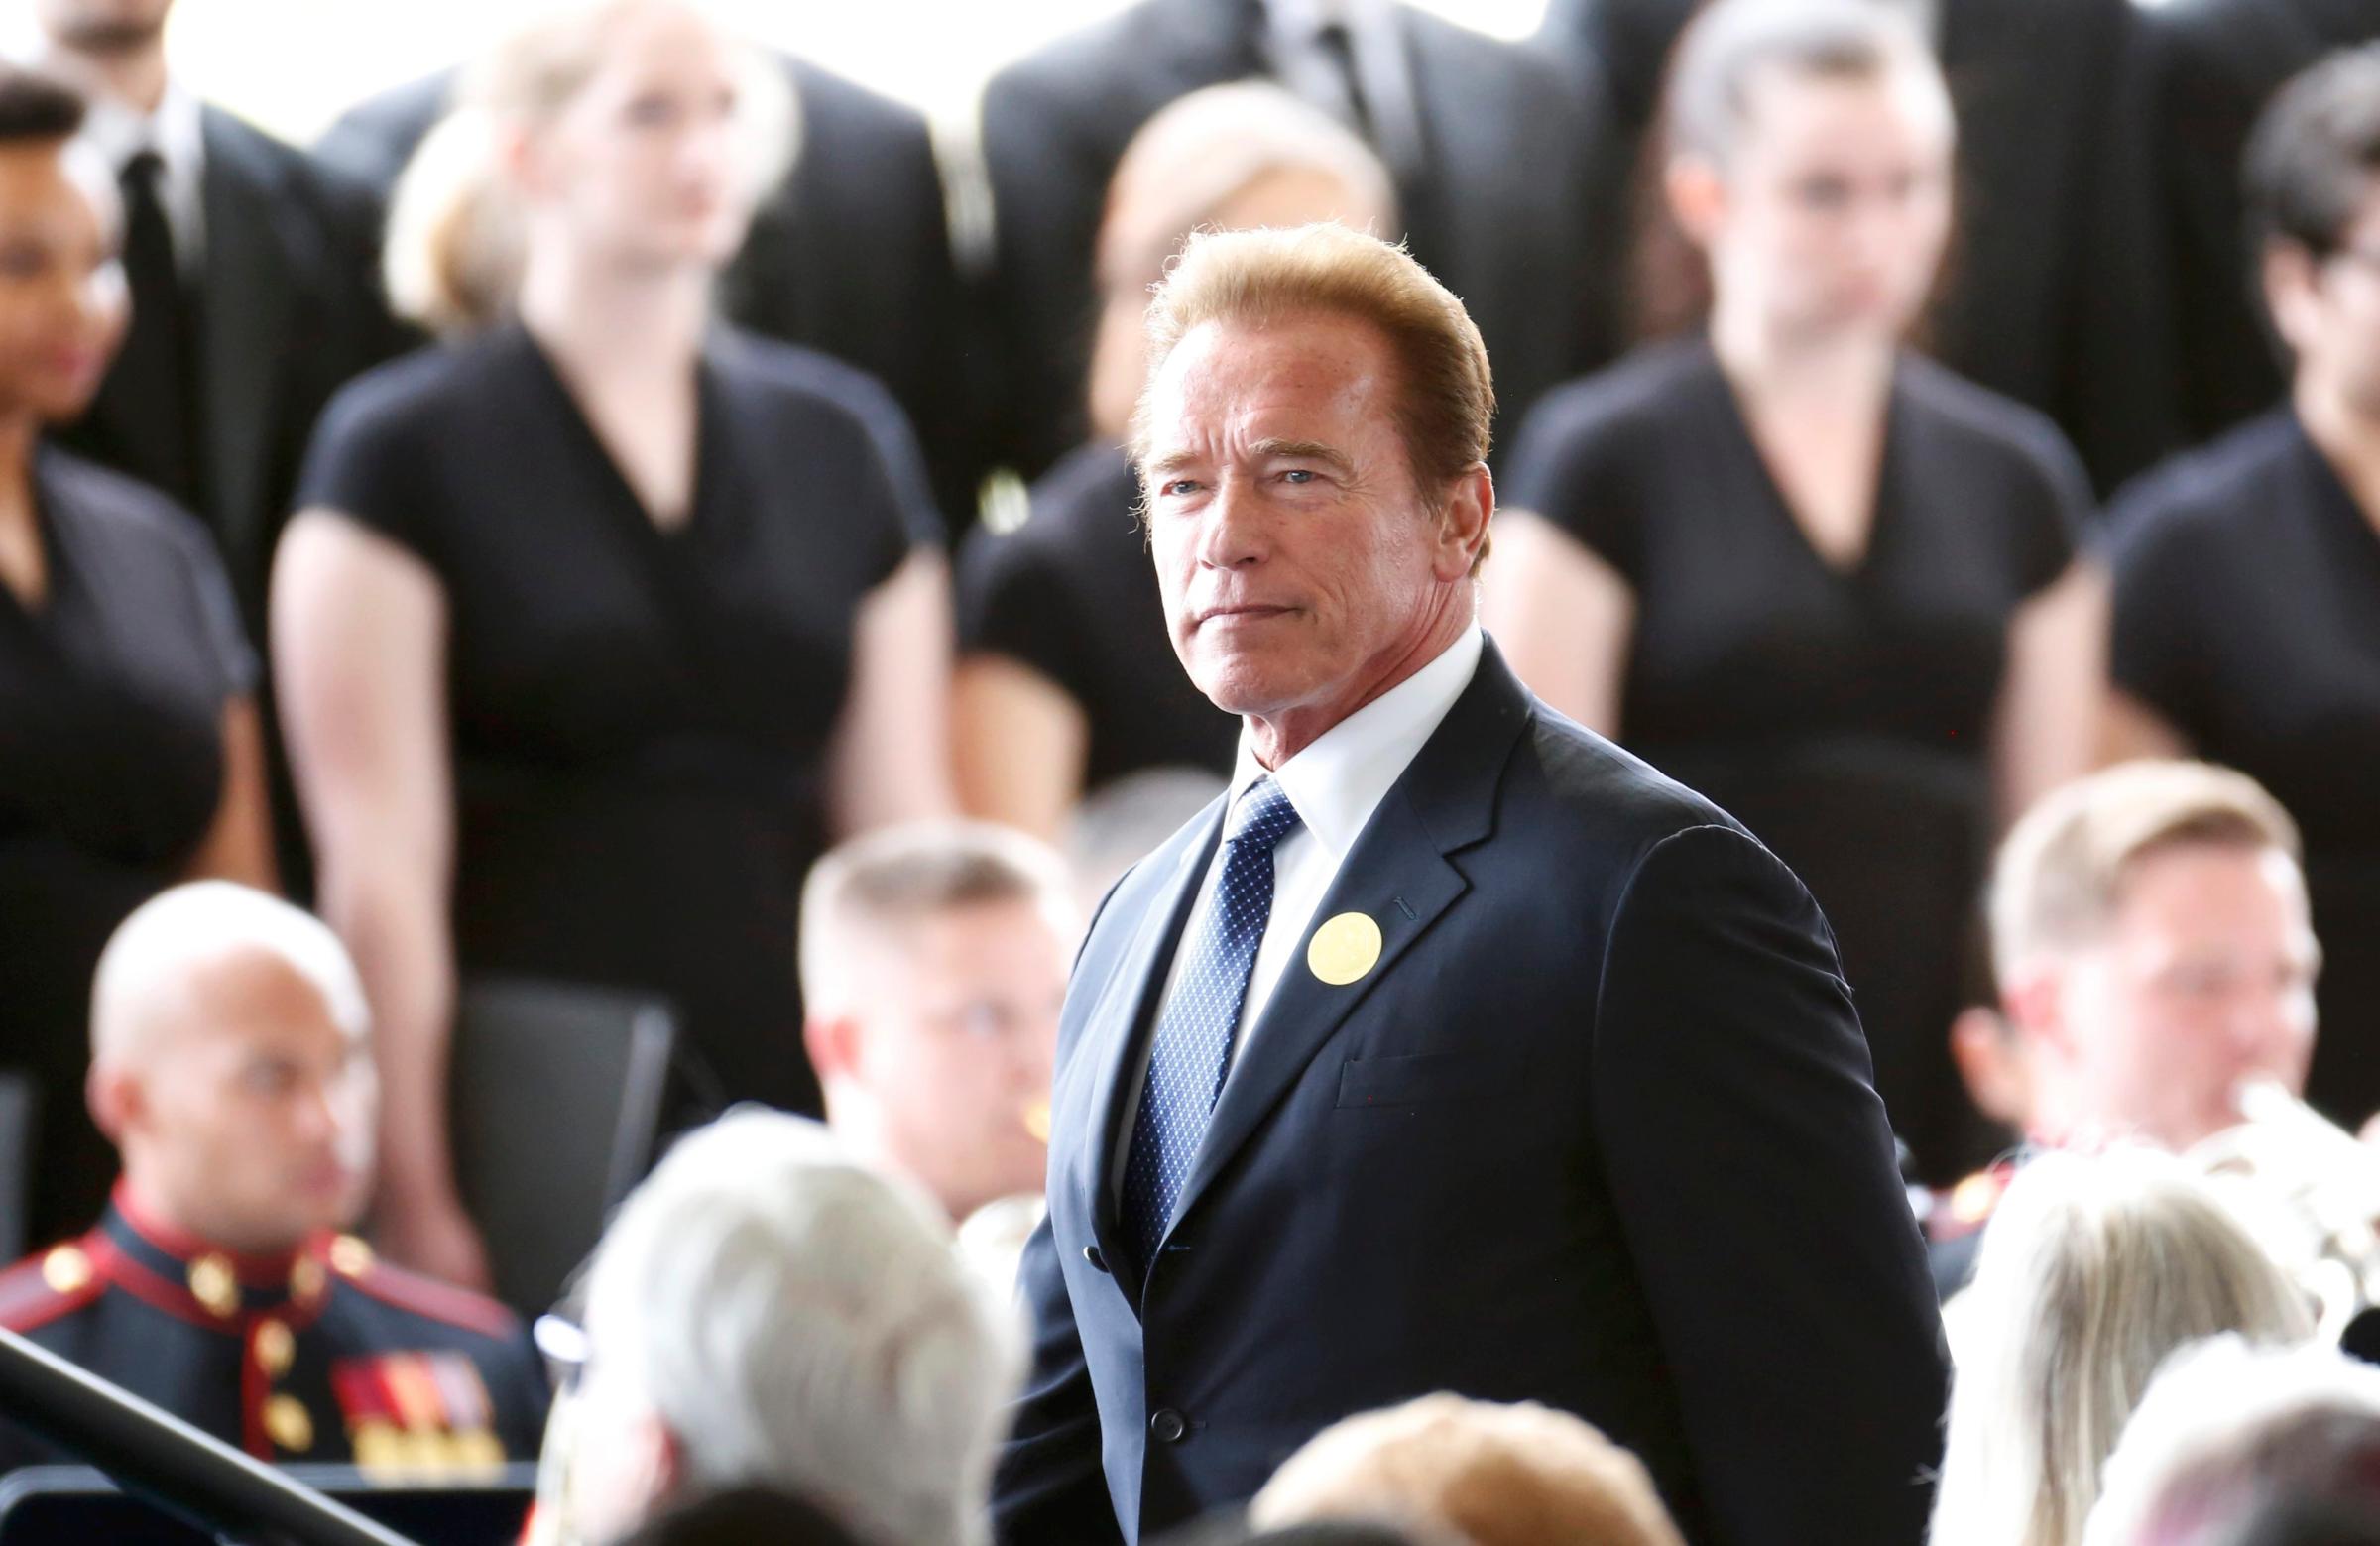 Former California Governor Arnold Schwarzenegger arrives for the funeral of Nancy Reagan at the Ronald Reagan Presidential Library in Simi Valley, California